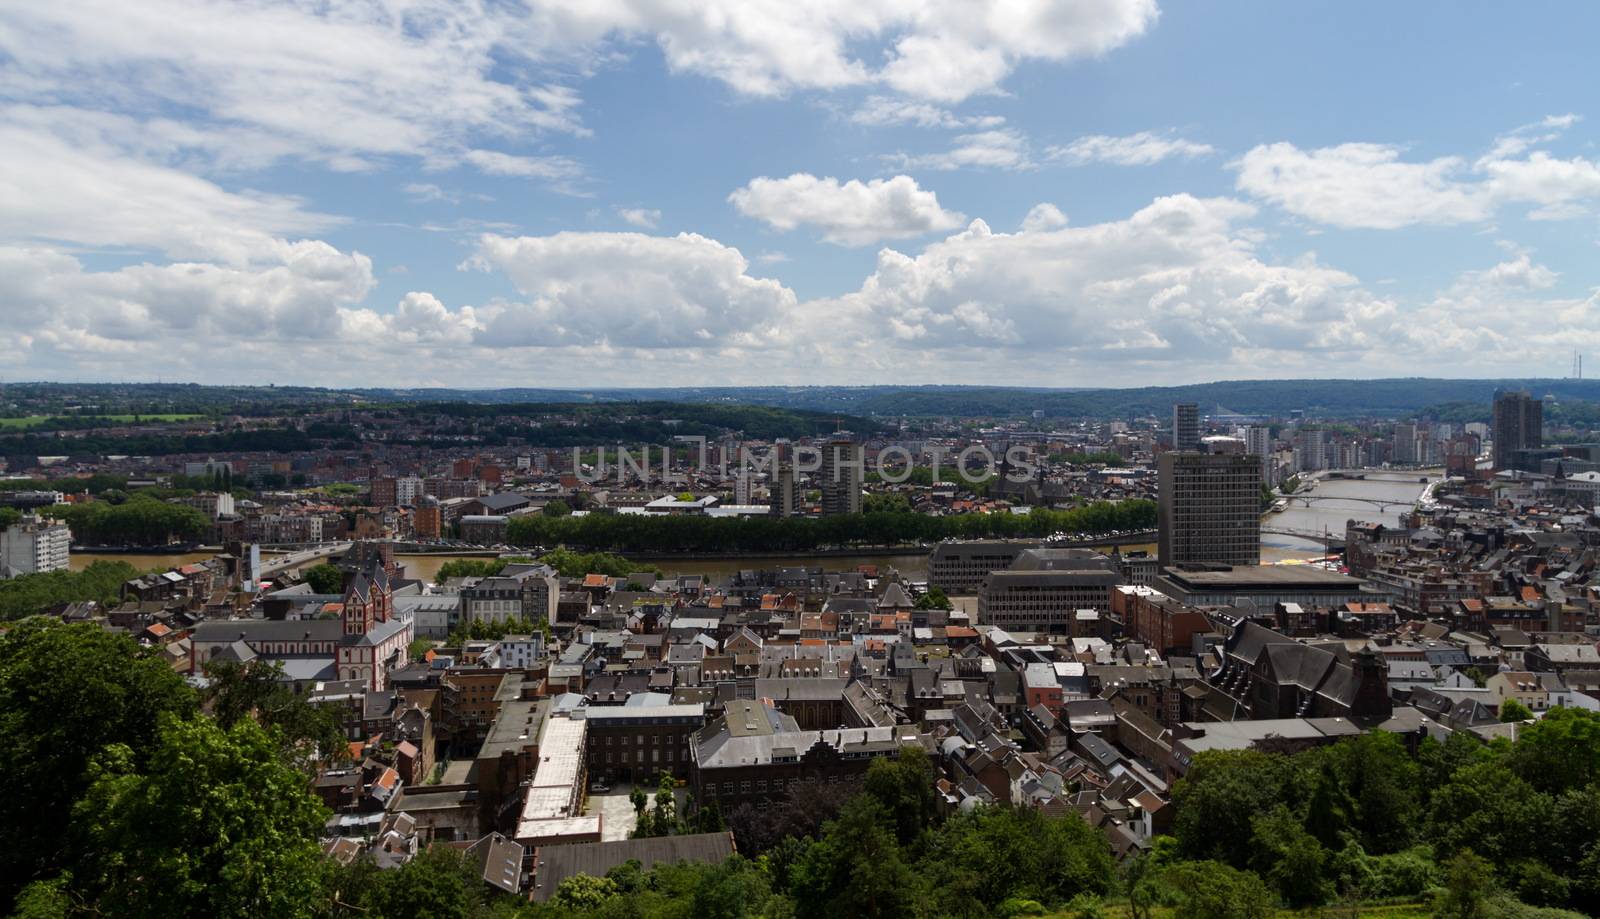 Very nice view of the city of Liege in Belgium by mariephotos